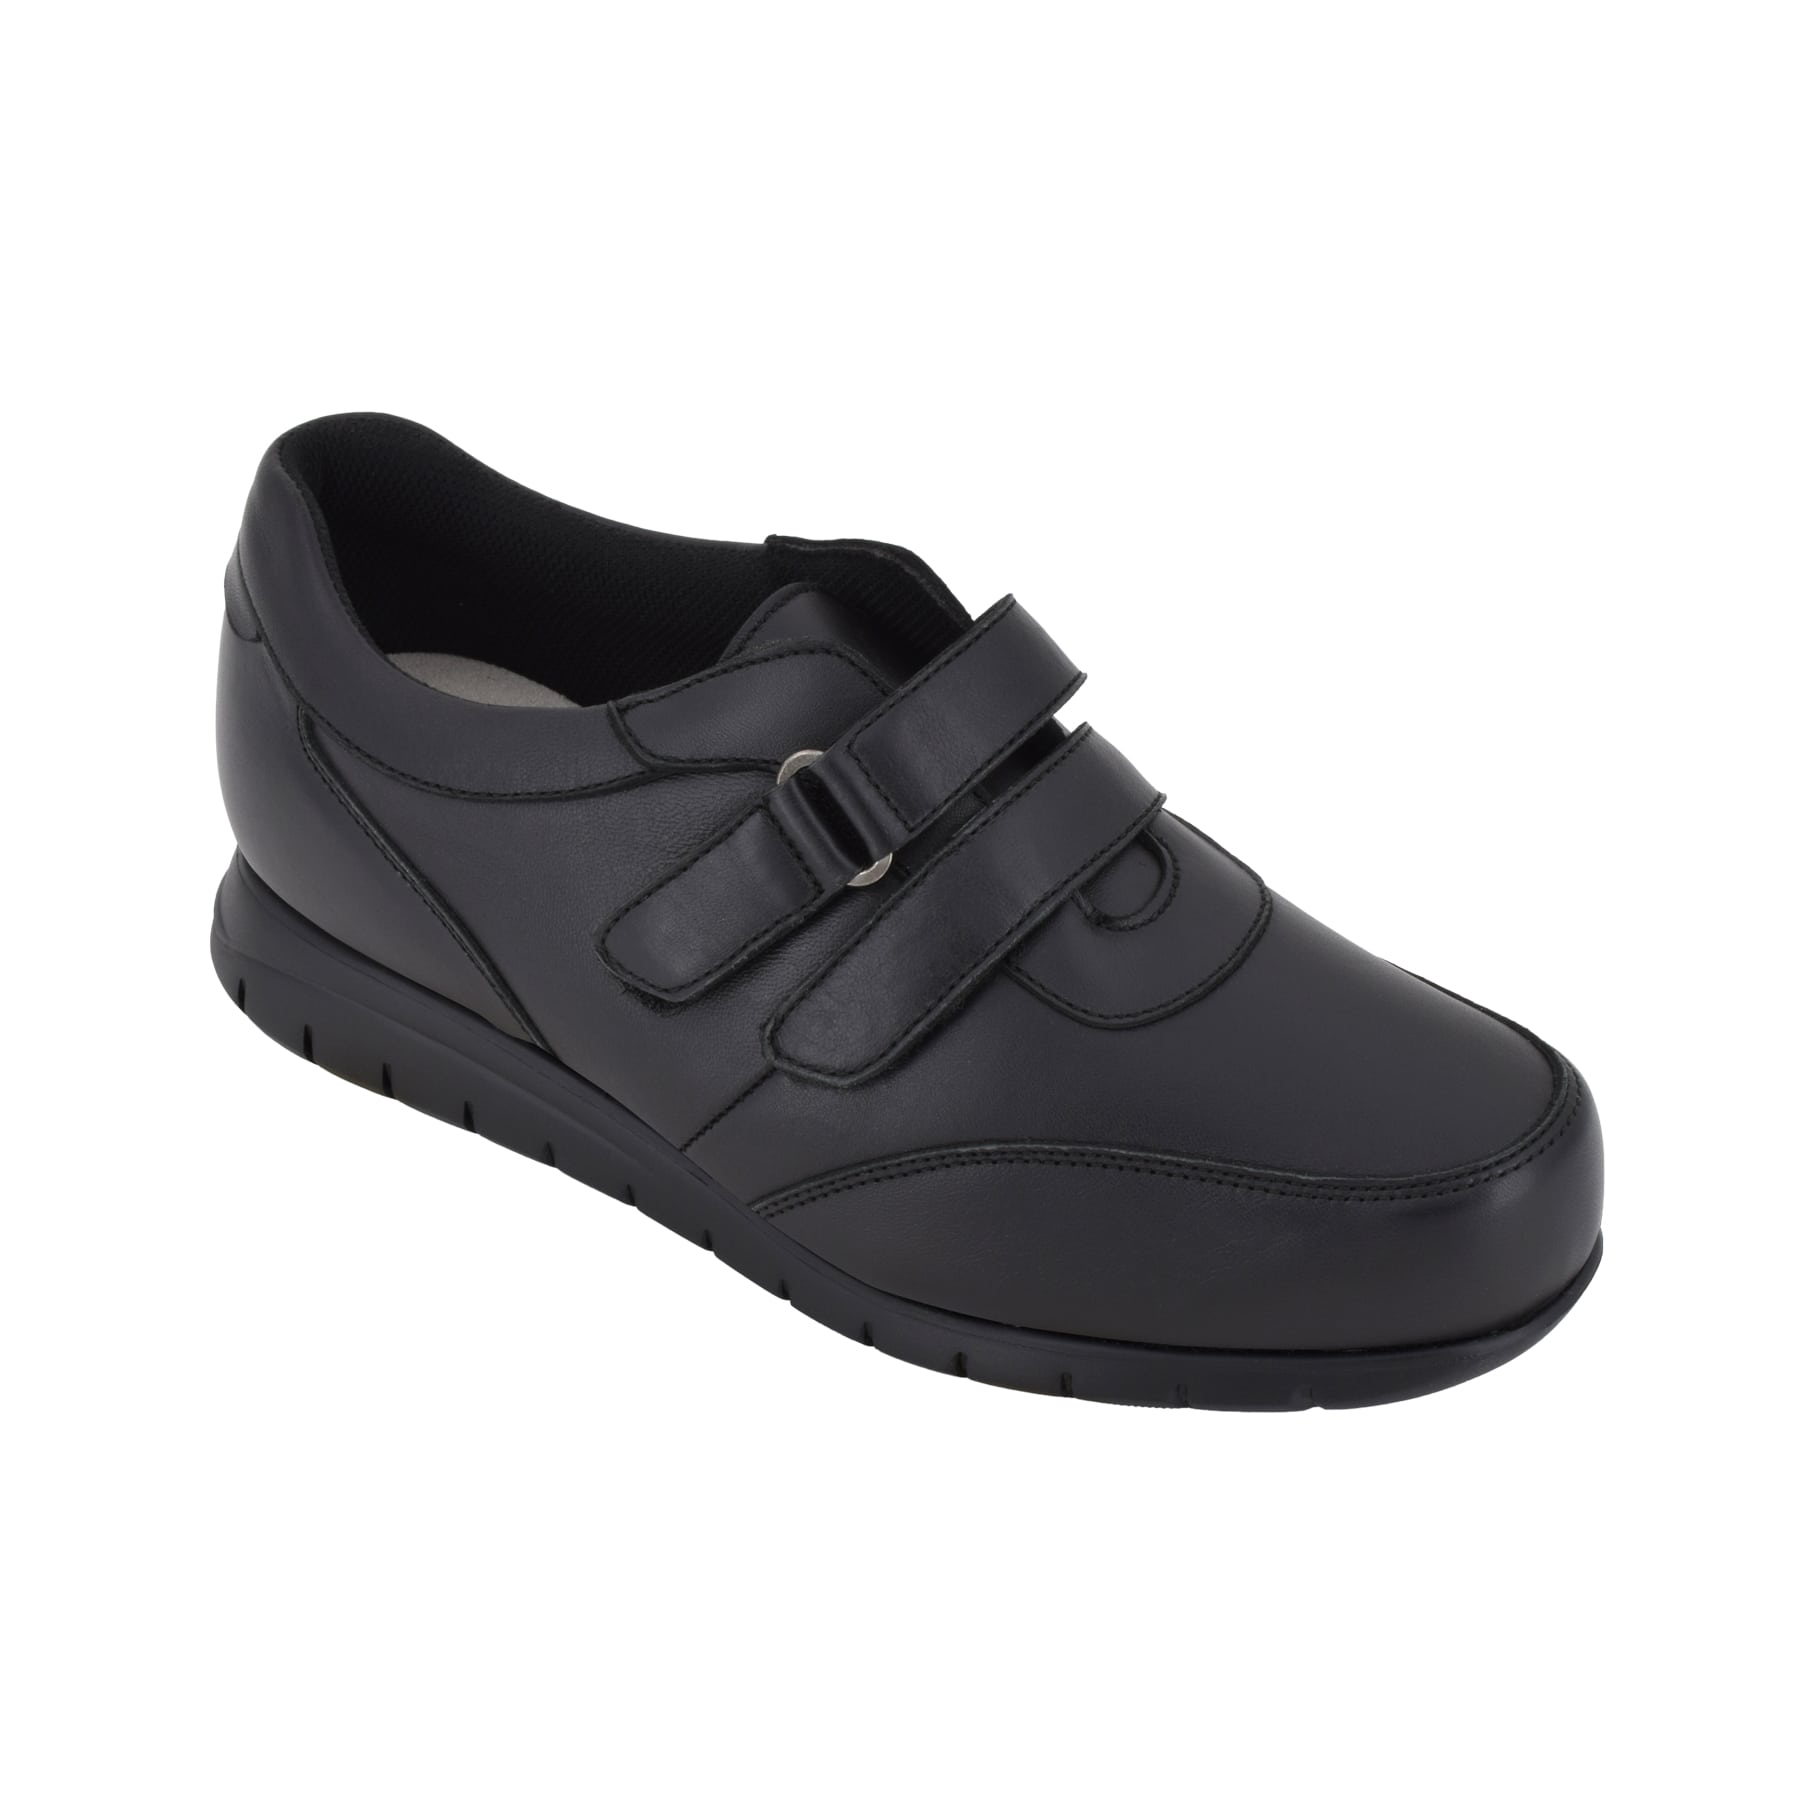 Biotime Women's Kora Shoes with leather upper and adjustable strap